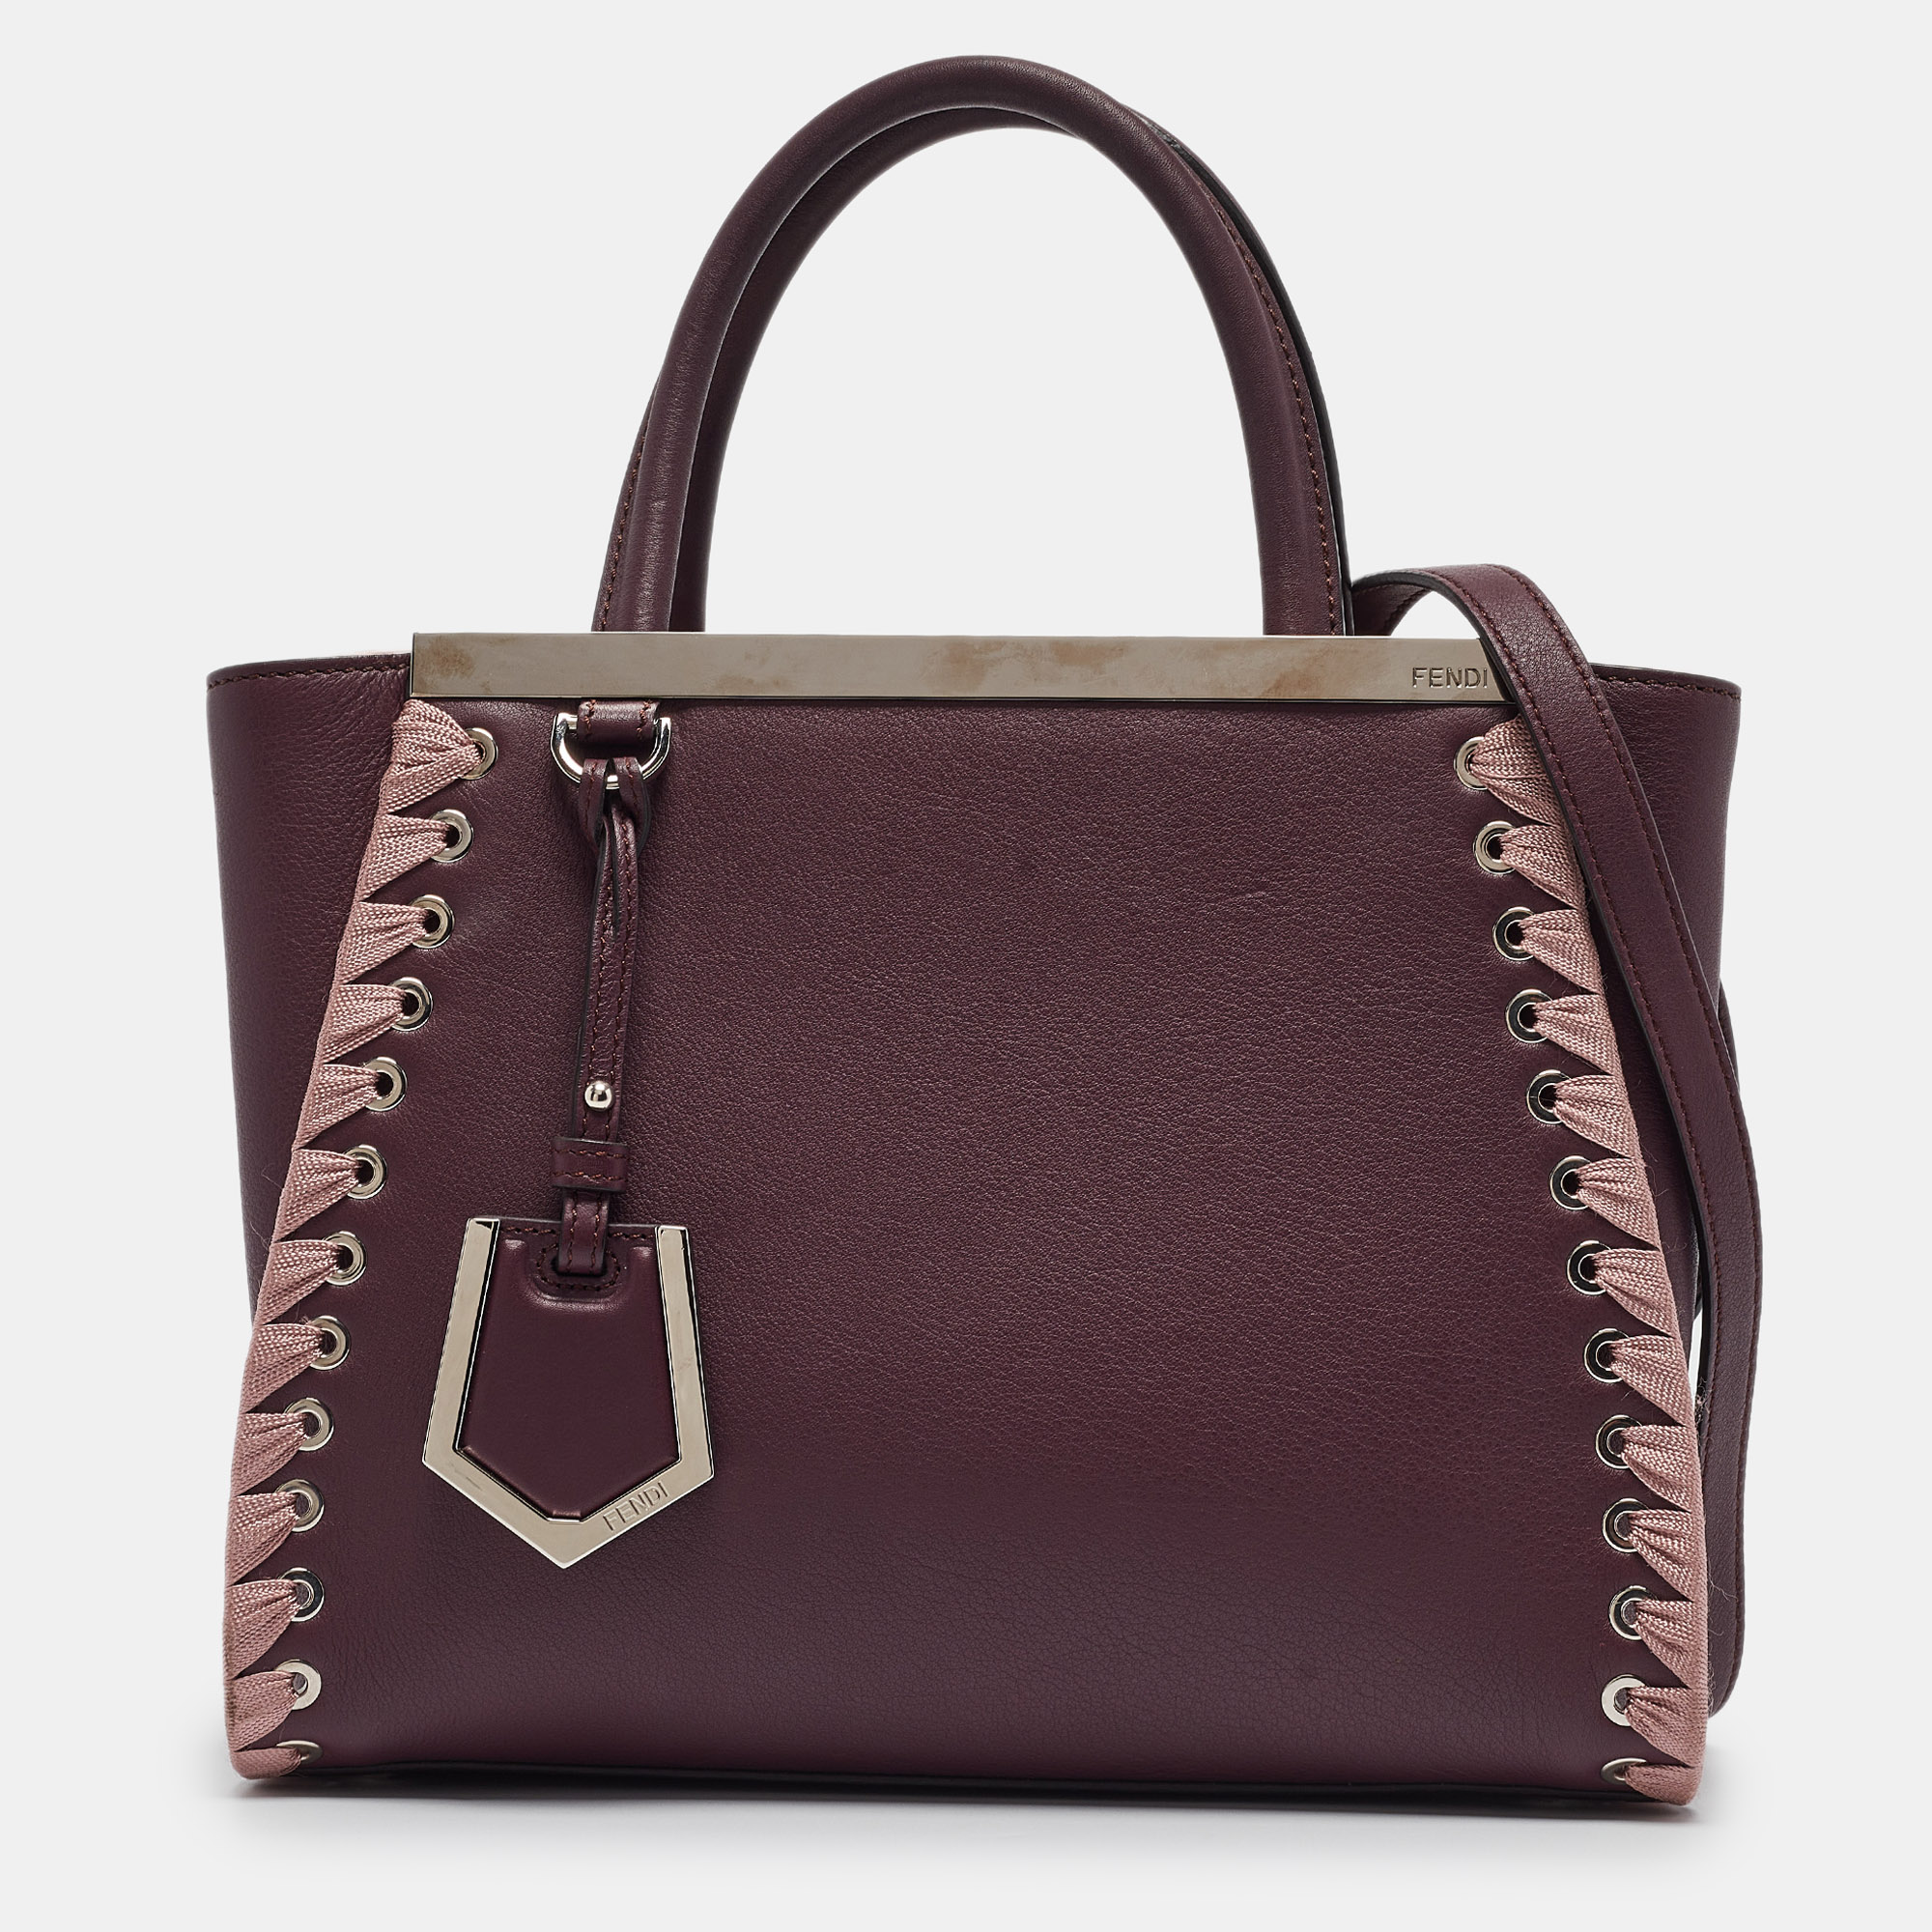 Fendi plum/pink leather petite whipstitch 2jours tote